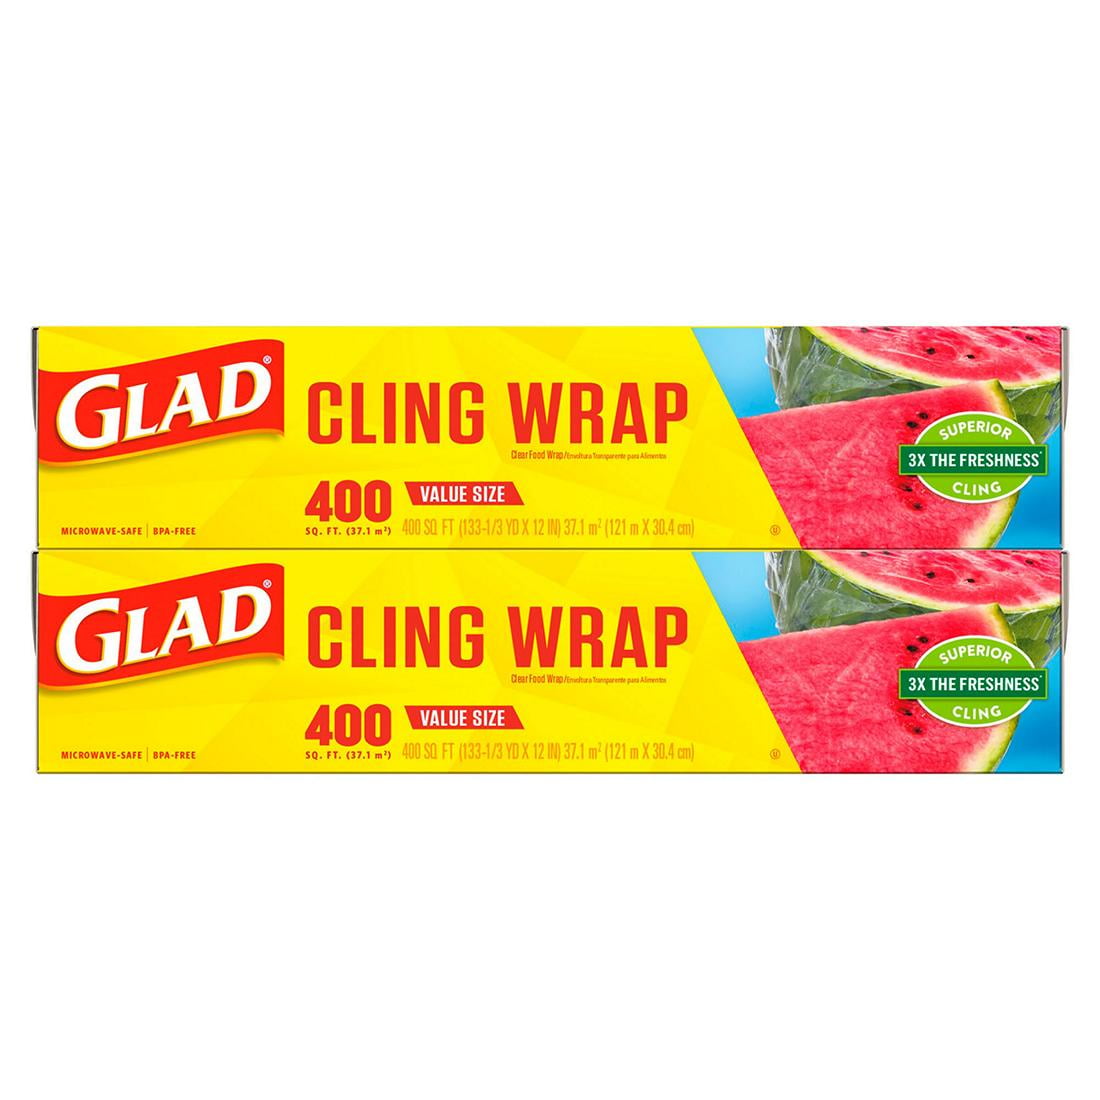 Glad® Plastic ClingWrap. Life Science Products